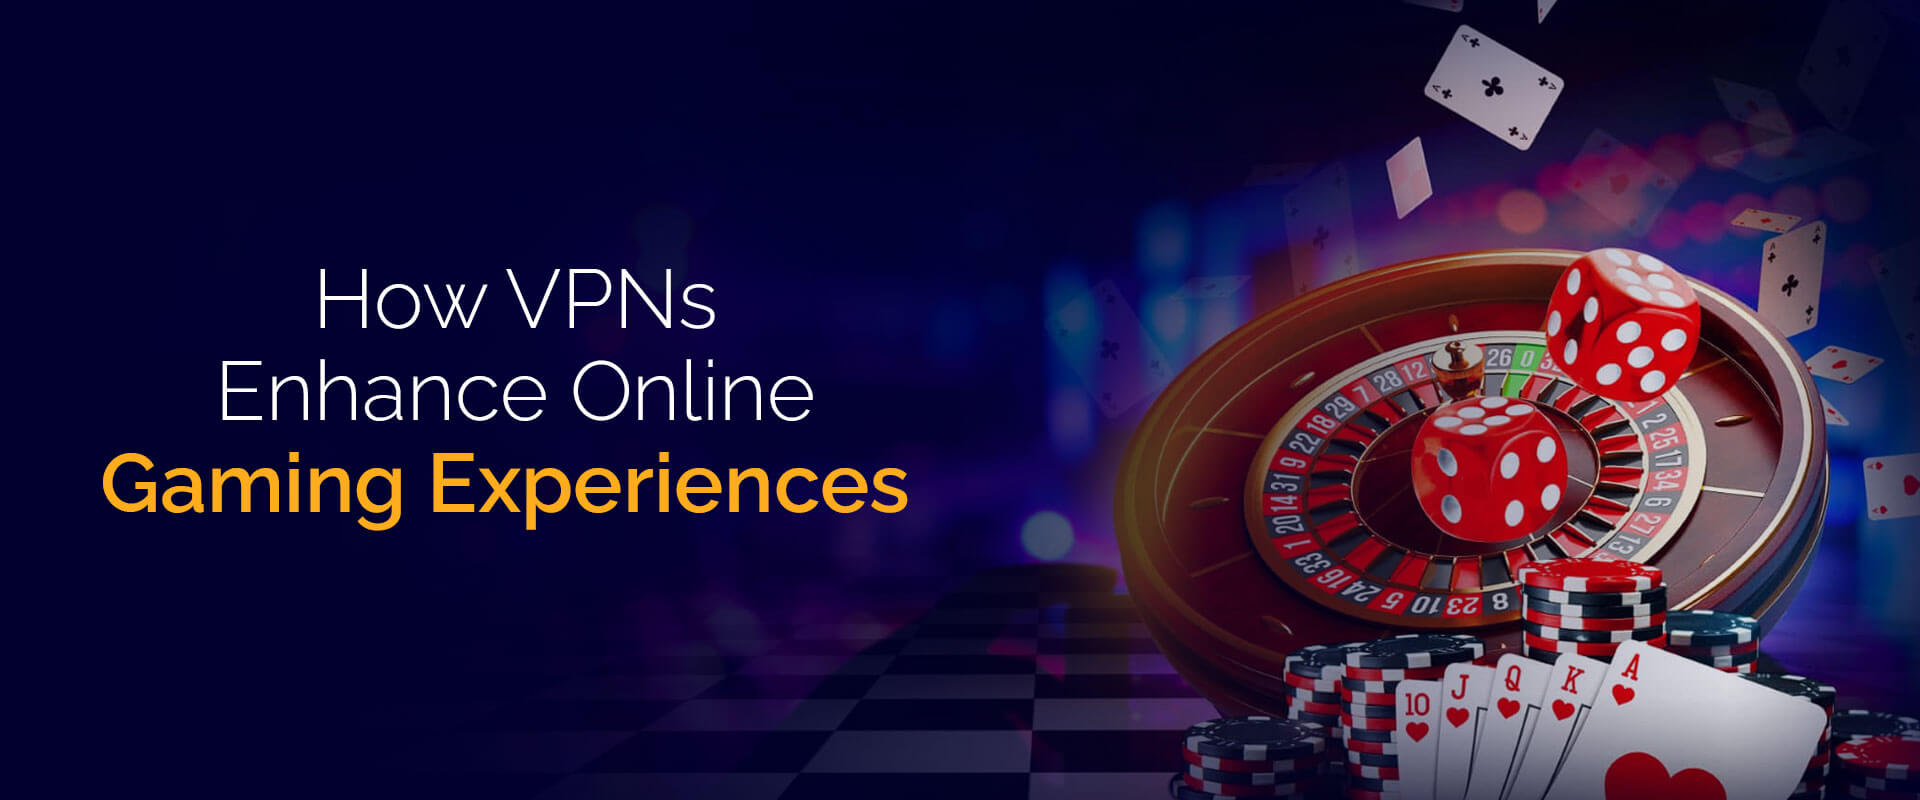 How VPNs Enhance Online Gaming Experiences